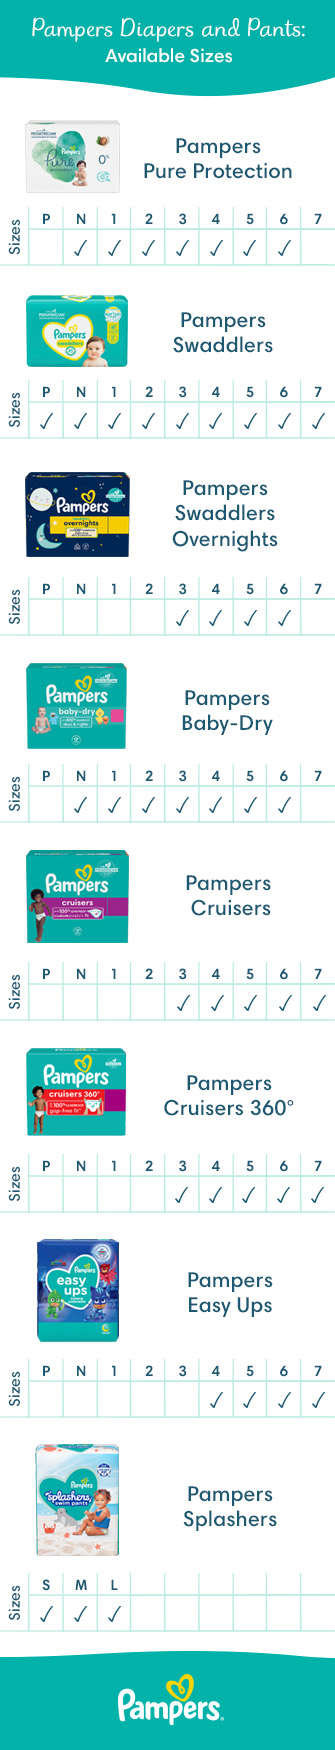 pampers cruisers size chart